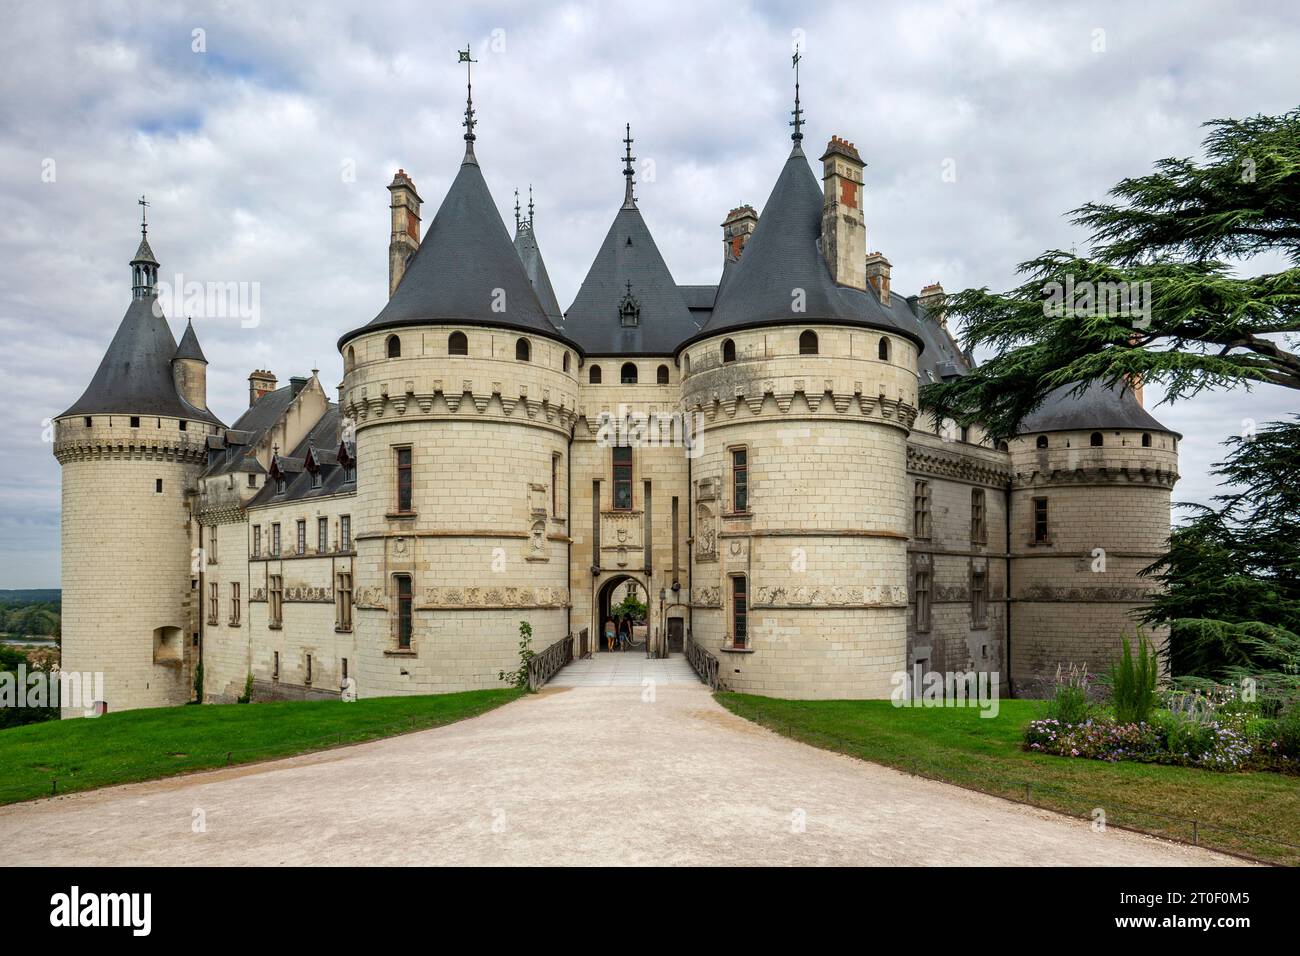 Chaumont Castle is located southwest of the city of Blois on a steep slope overlooking the commune of Chaumont-sur-Loire on the banks of the Loire River. Stock Photo